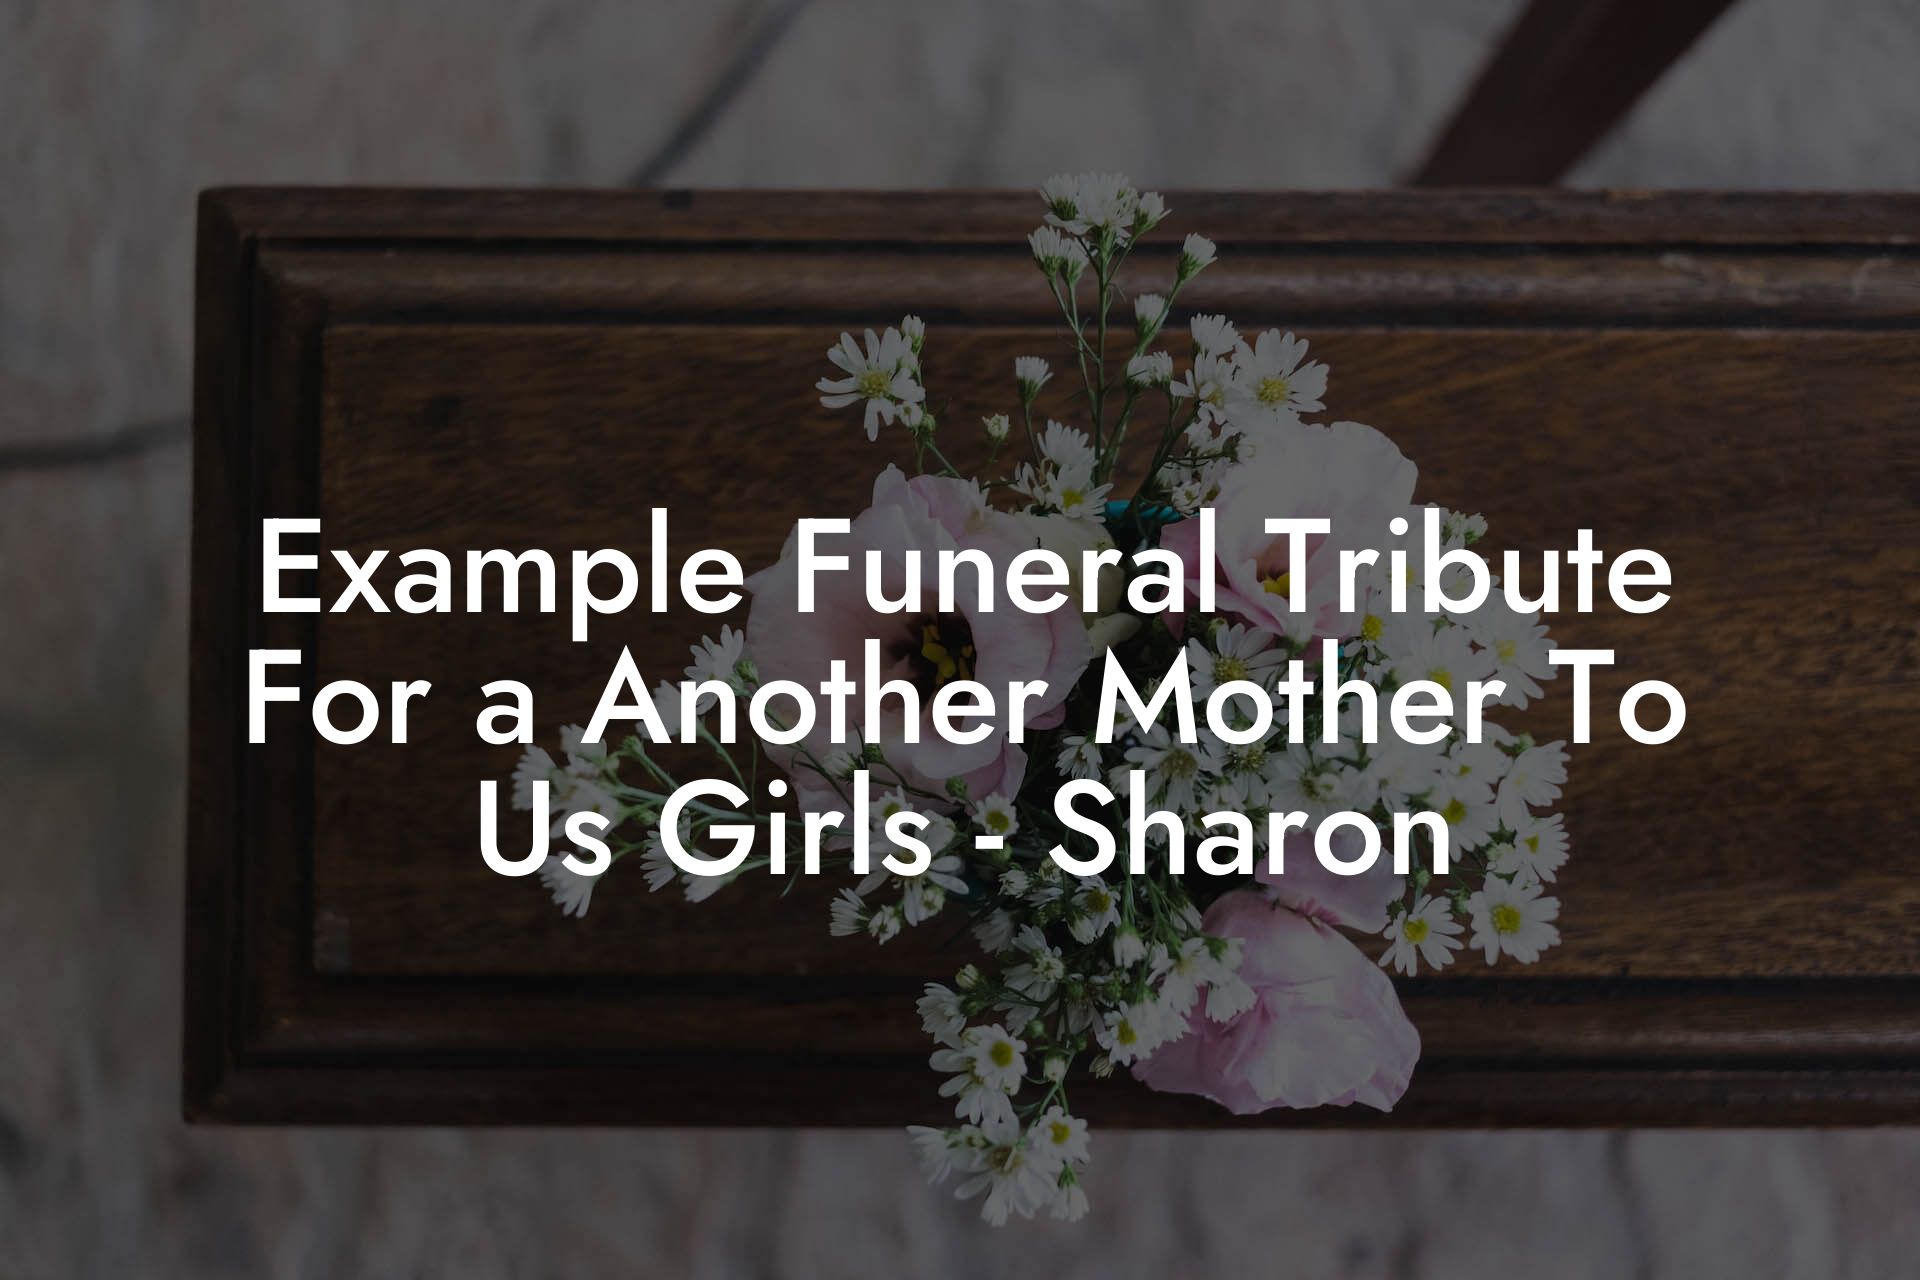 Example Funeral Tribute For a Another Mother To Us Girls - Sharon